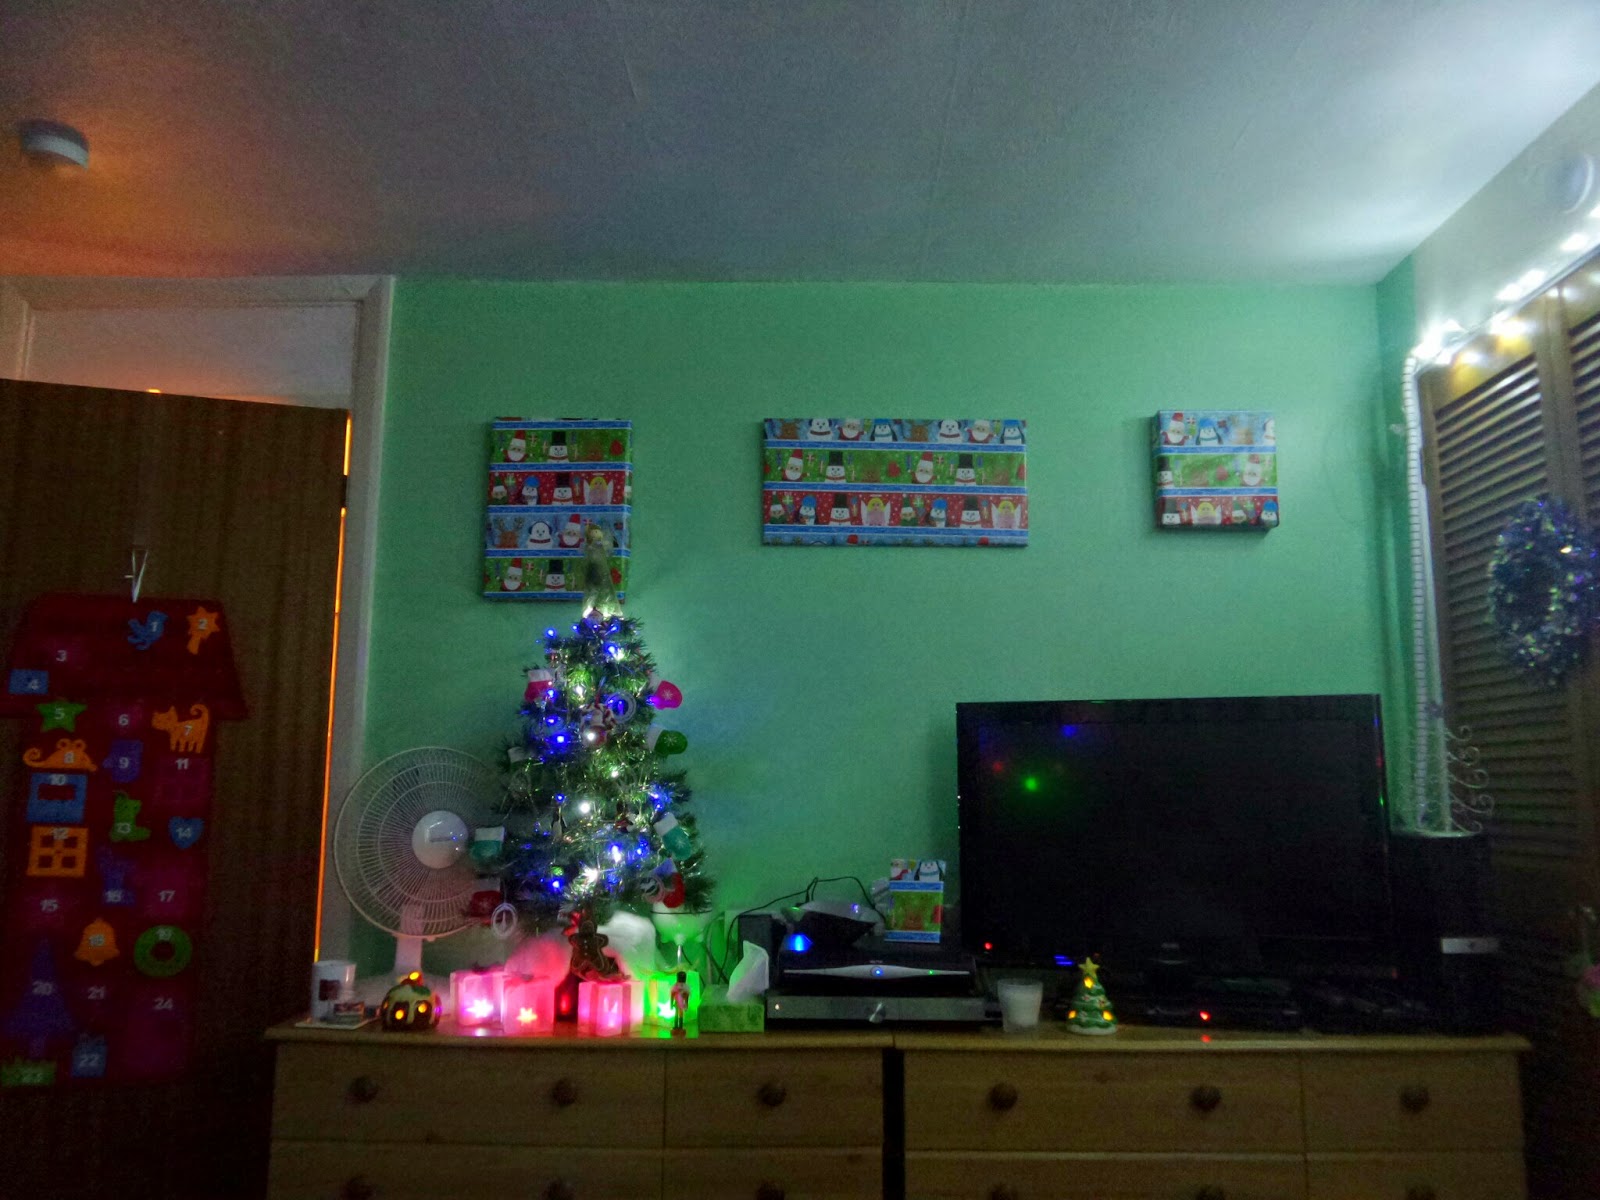 Christmas decorated units at the end of my bed. Complete with Christmas tree